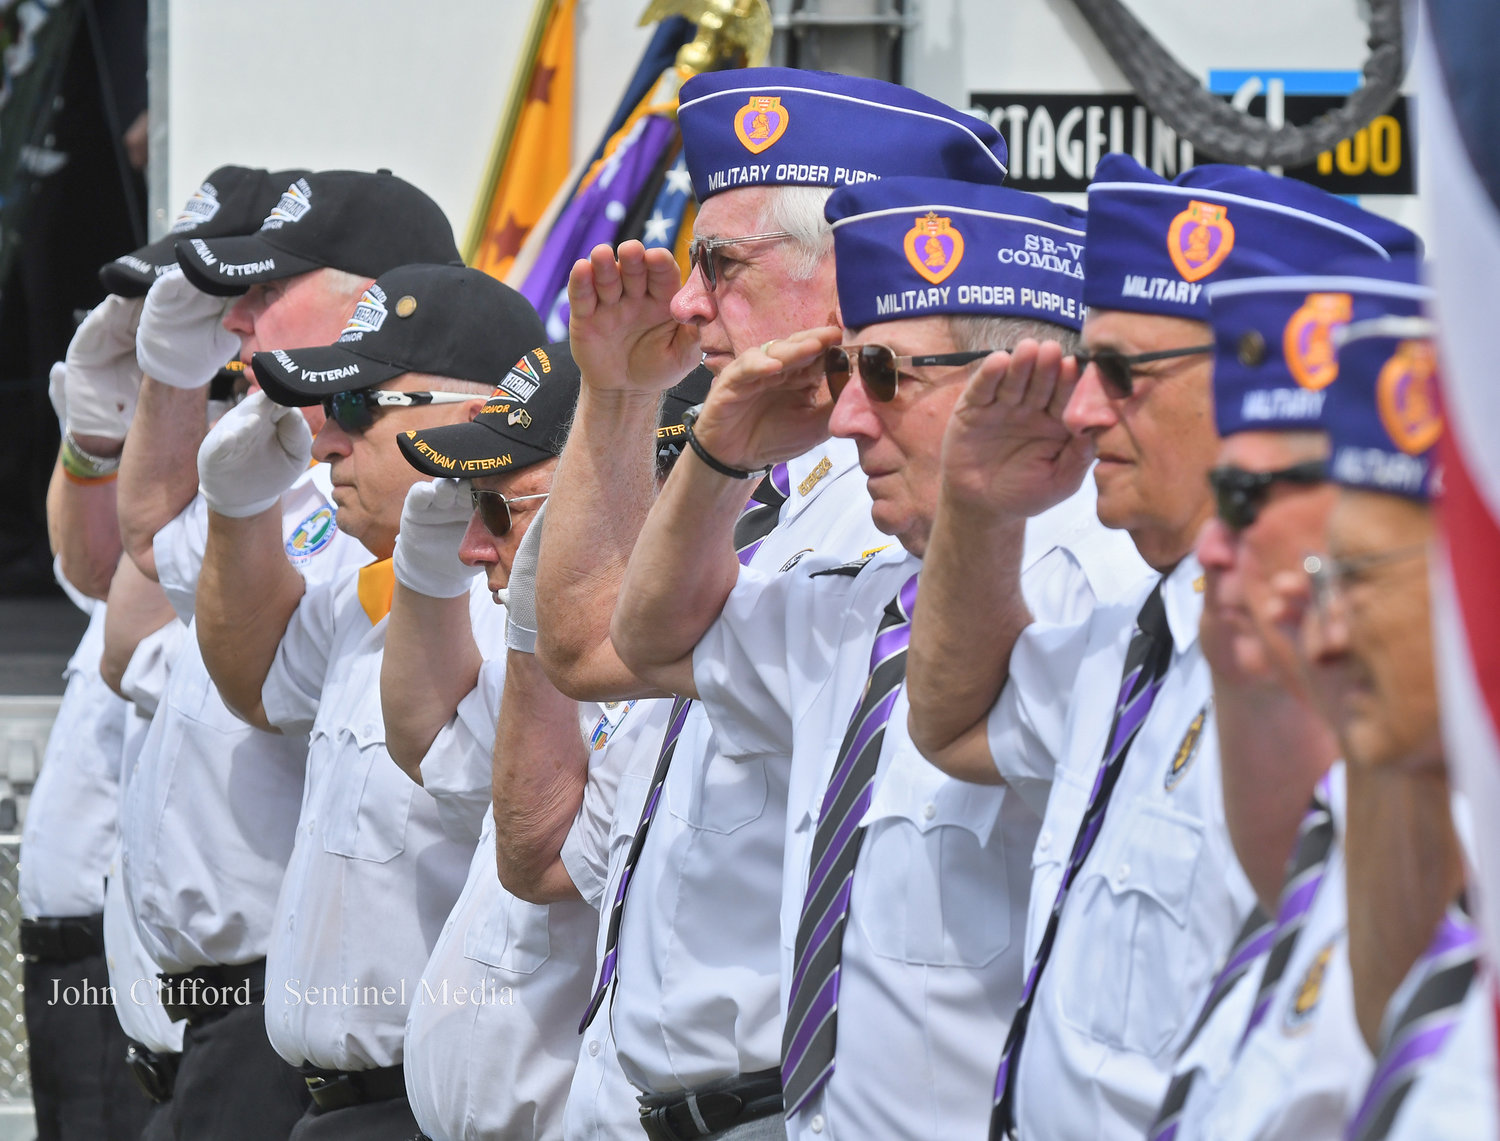 Vietnam Veterans of America and Military Order of the Purple Heart salute during the ceremony during taps.